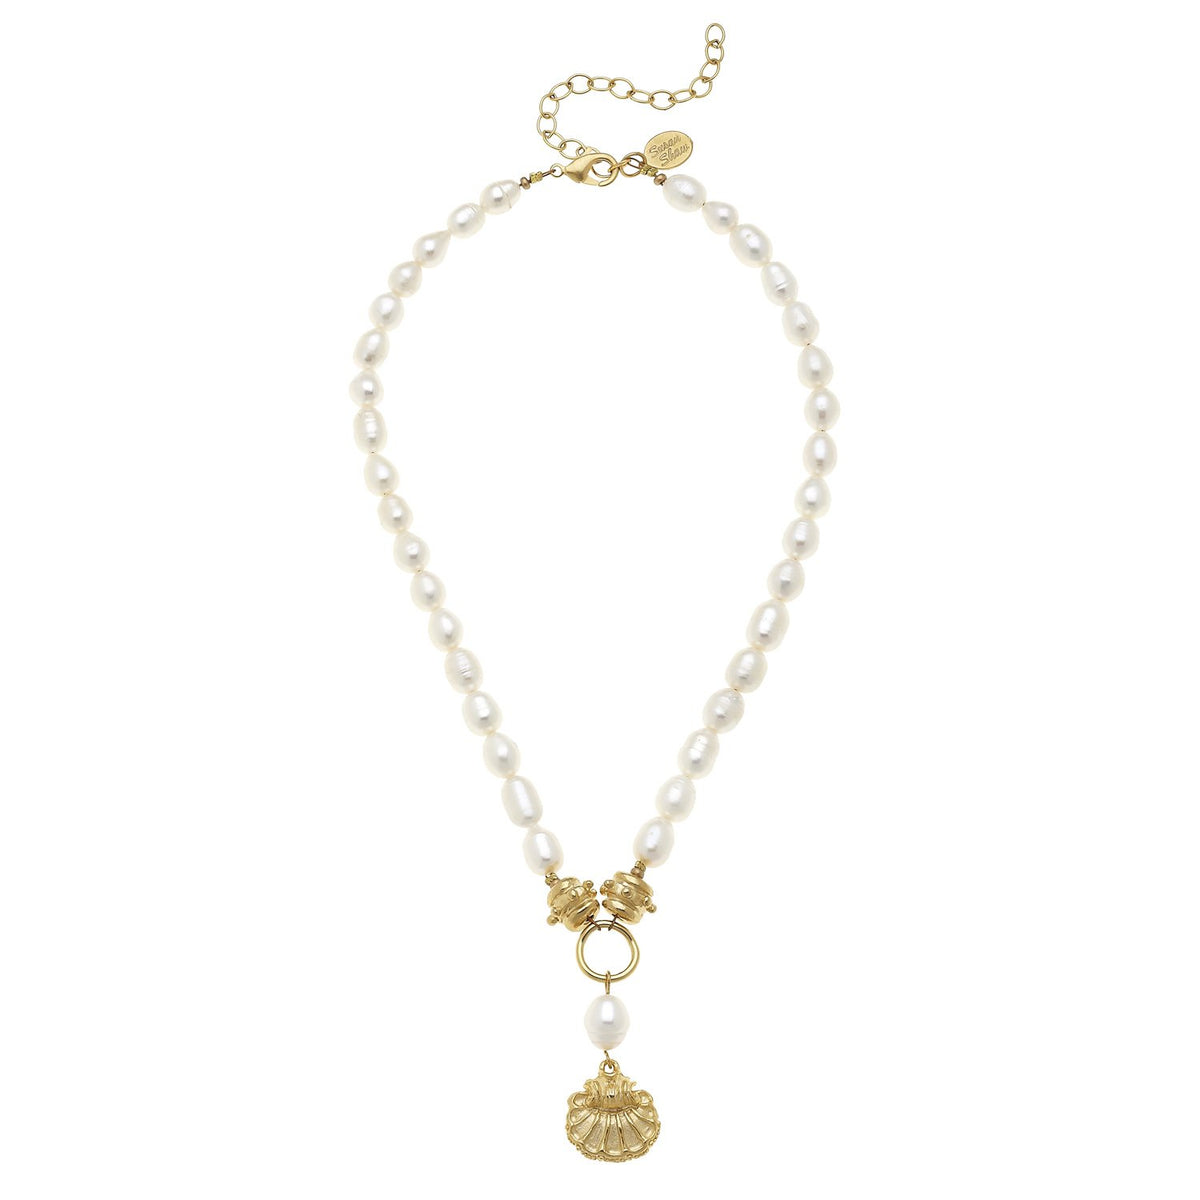 Susan Shaw Pearl Scallop Drop Necklace - Susan Shaw Jewelry